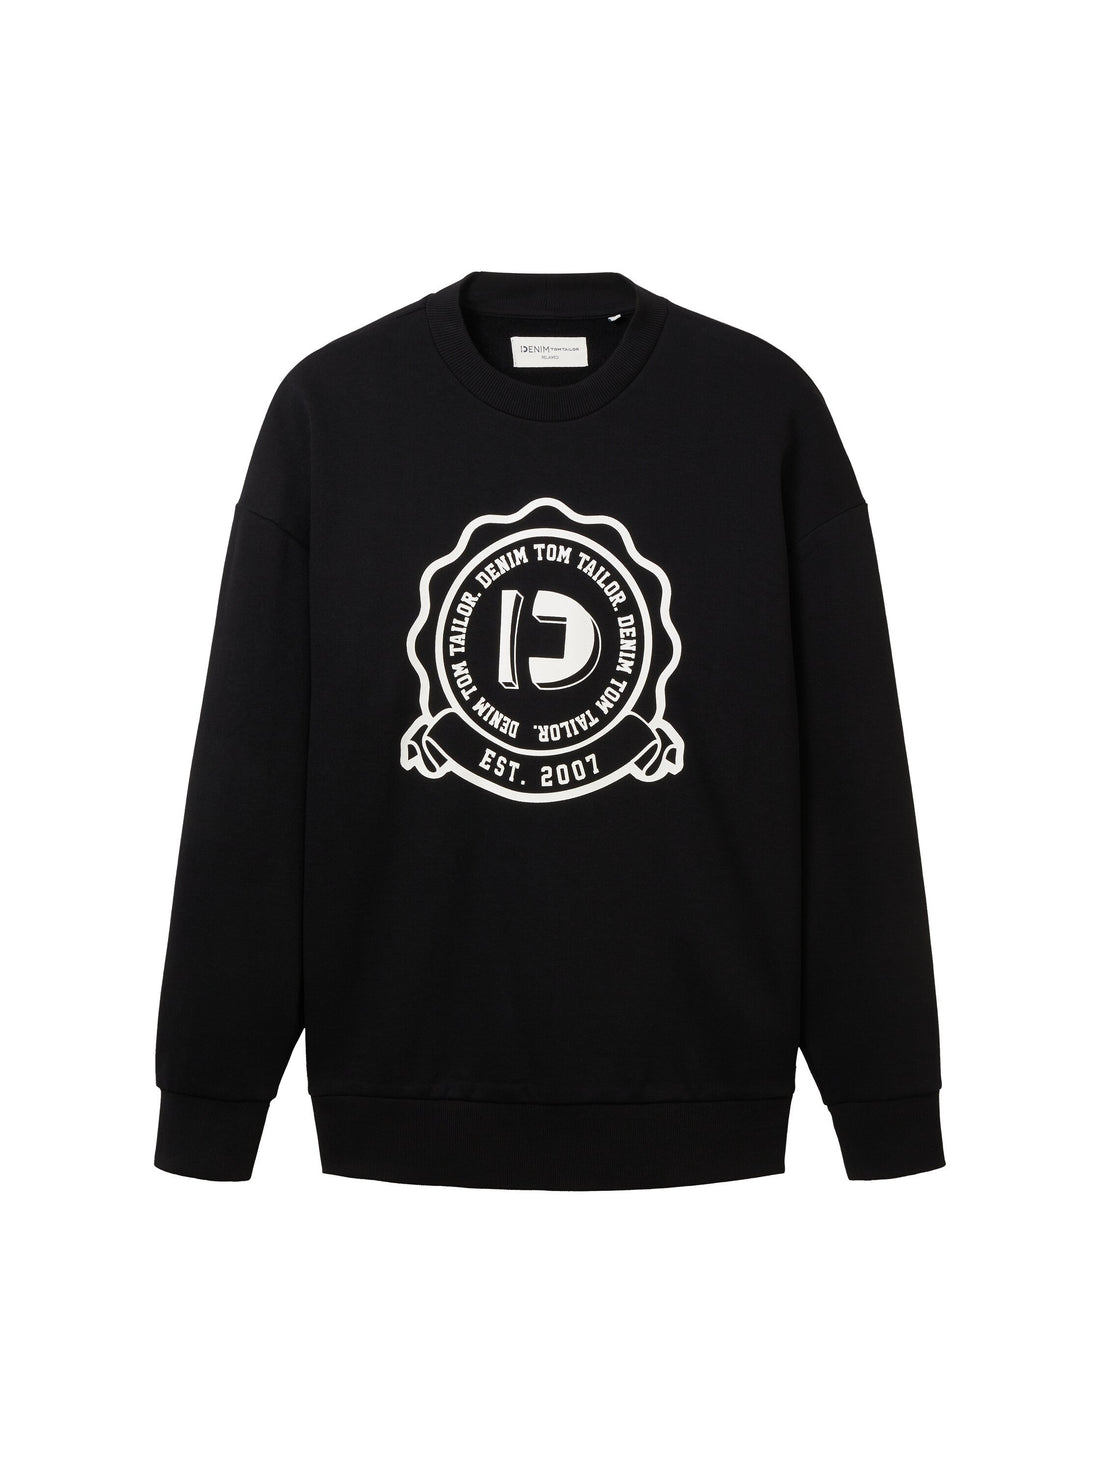 Relaxed Crew Neck Sweater_1037606_29999_01